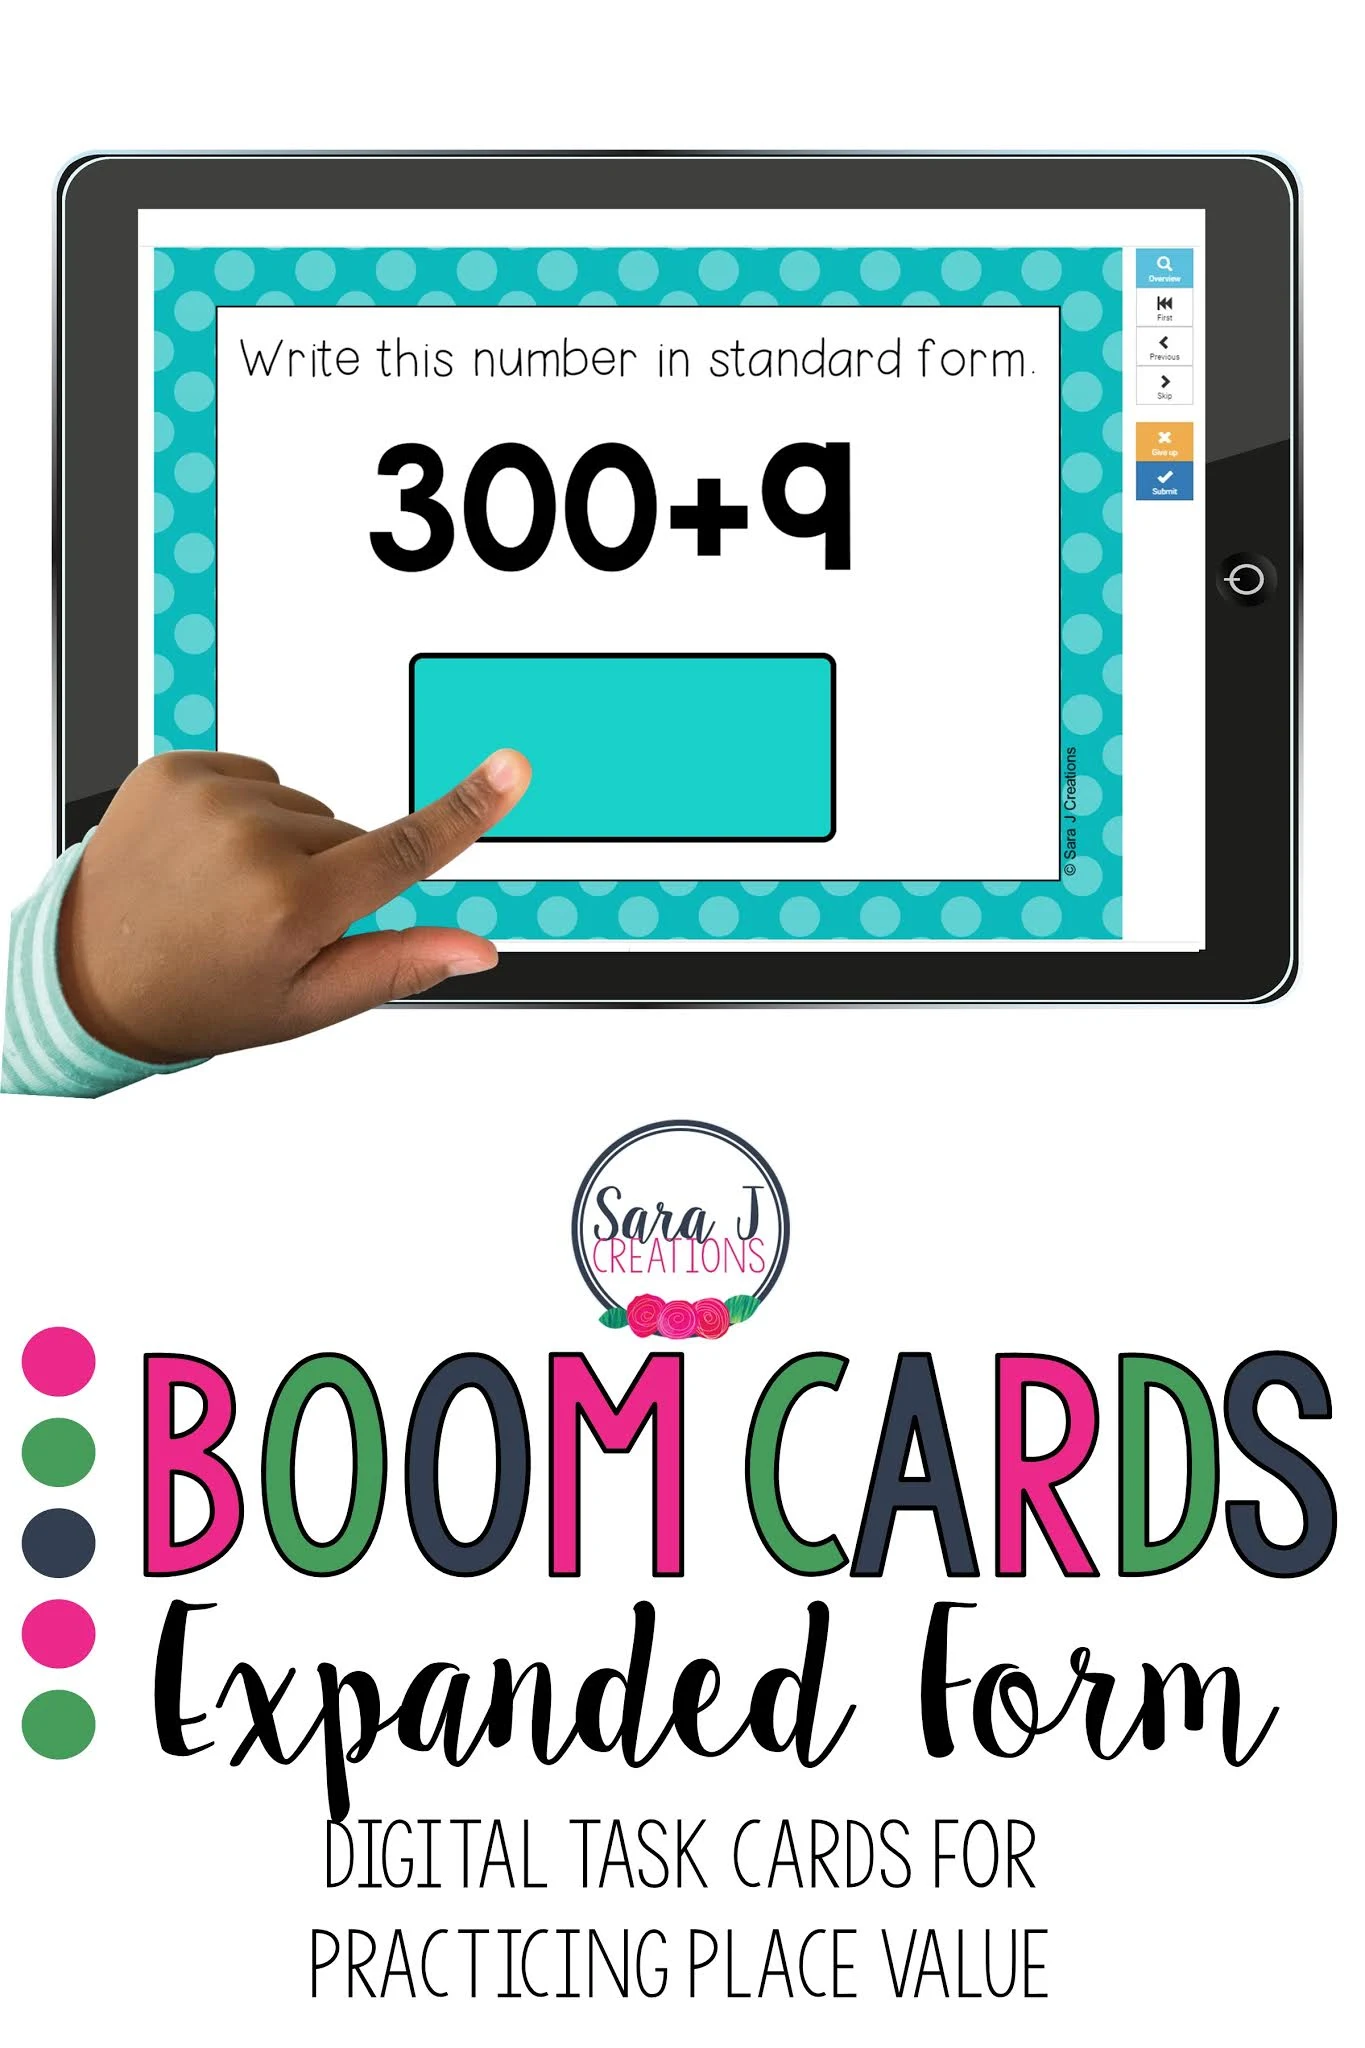 Digital task cards (Boom Cards) make teaching place value and expanded form more fun and engaging. Self checking, no prep cards make it perfect for a busy teacher.